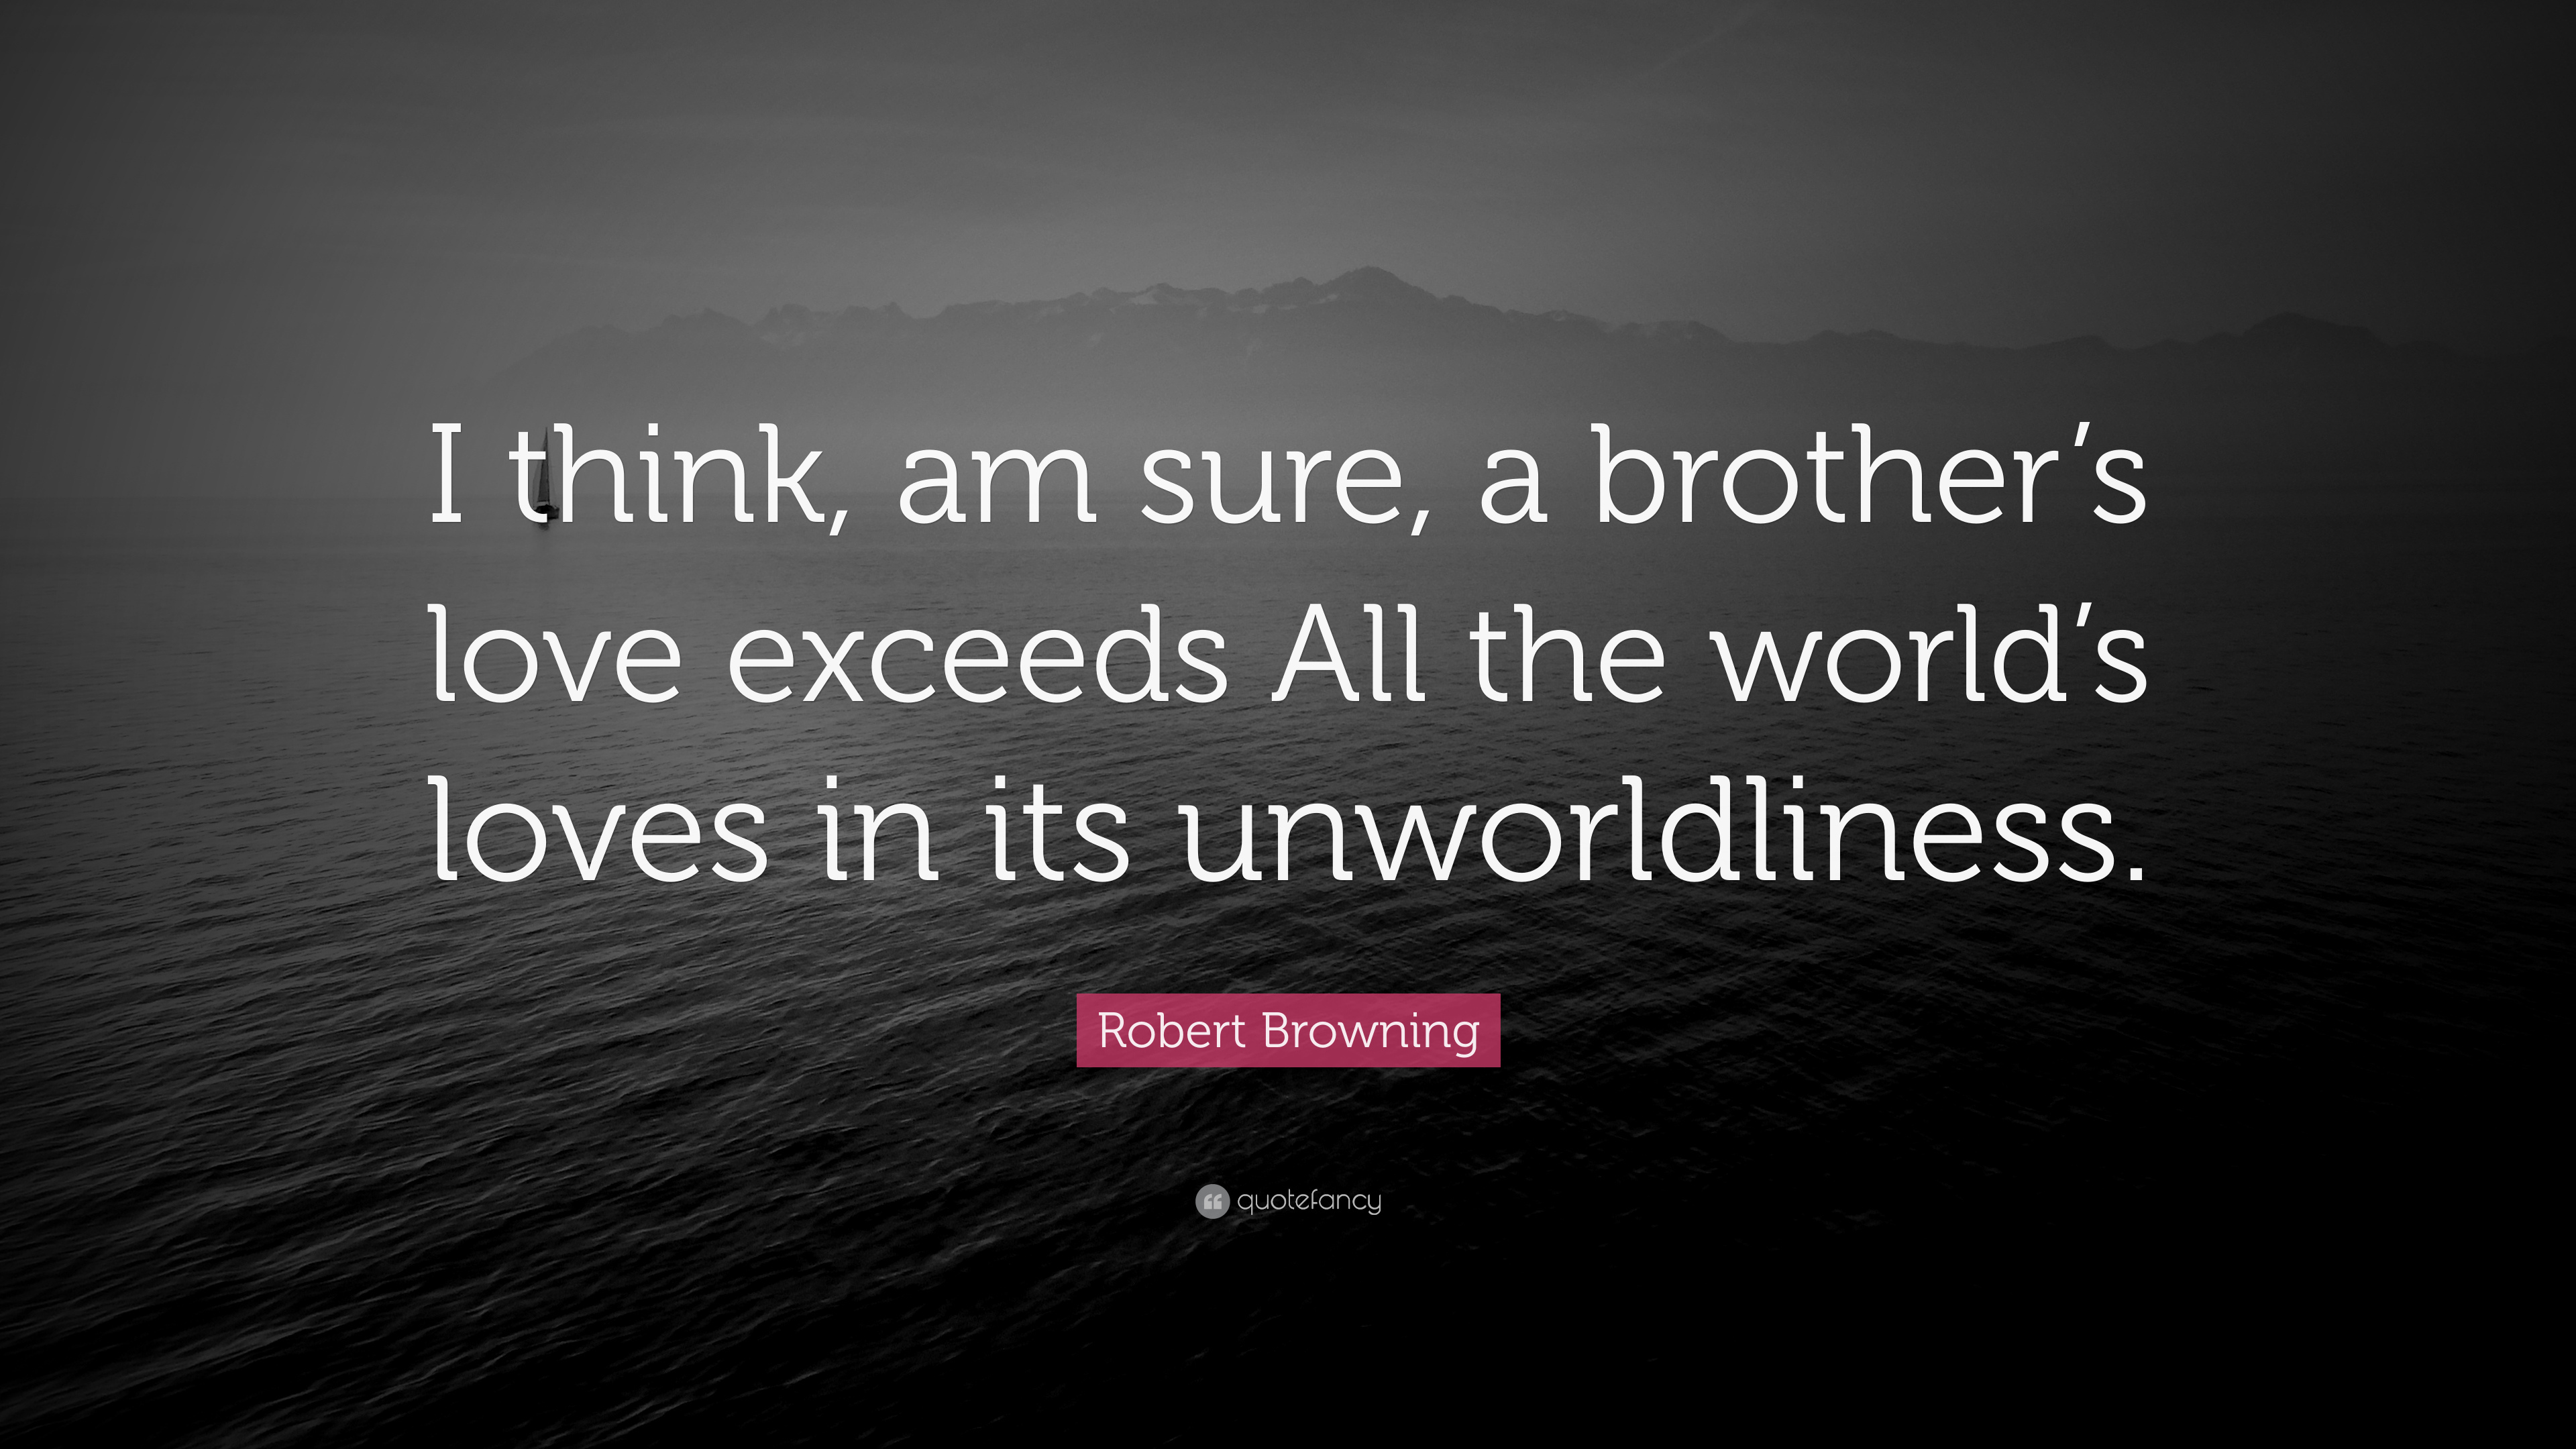 Robert Browning Quote: “I think, am sure, a brother's love exceeds All the world's loves in